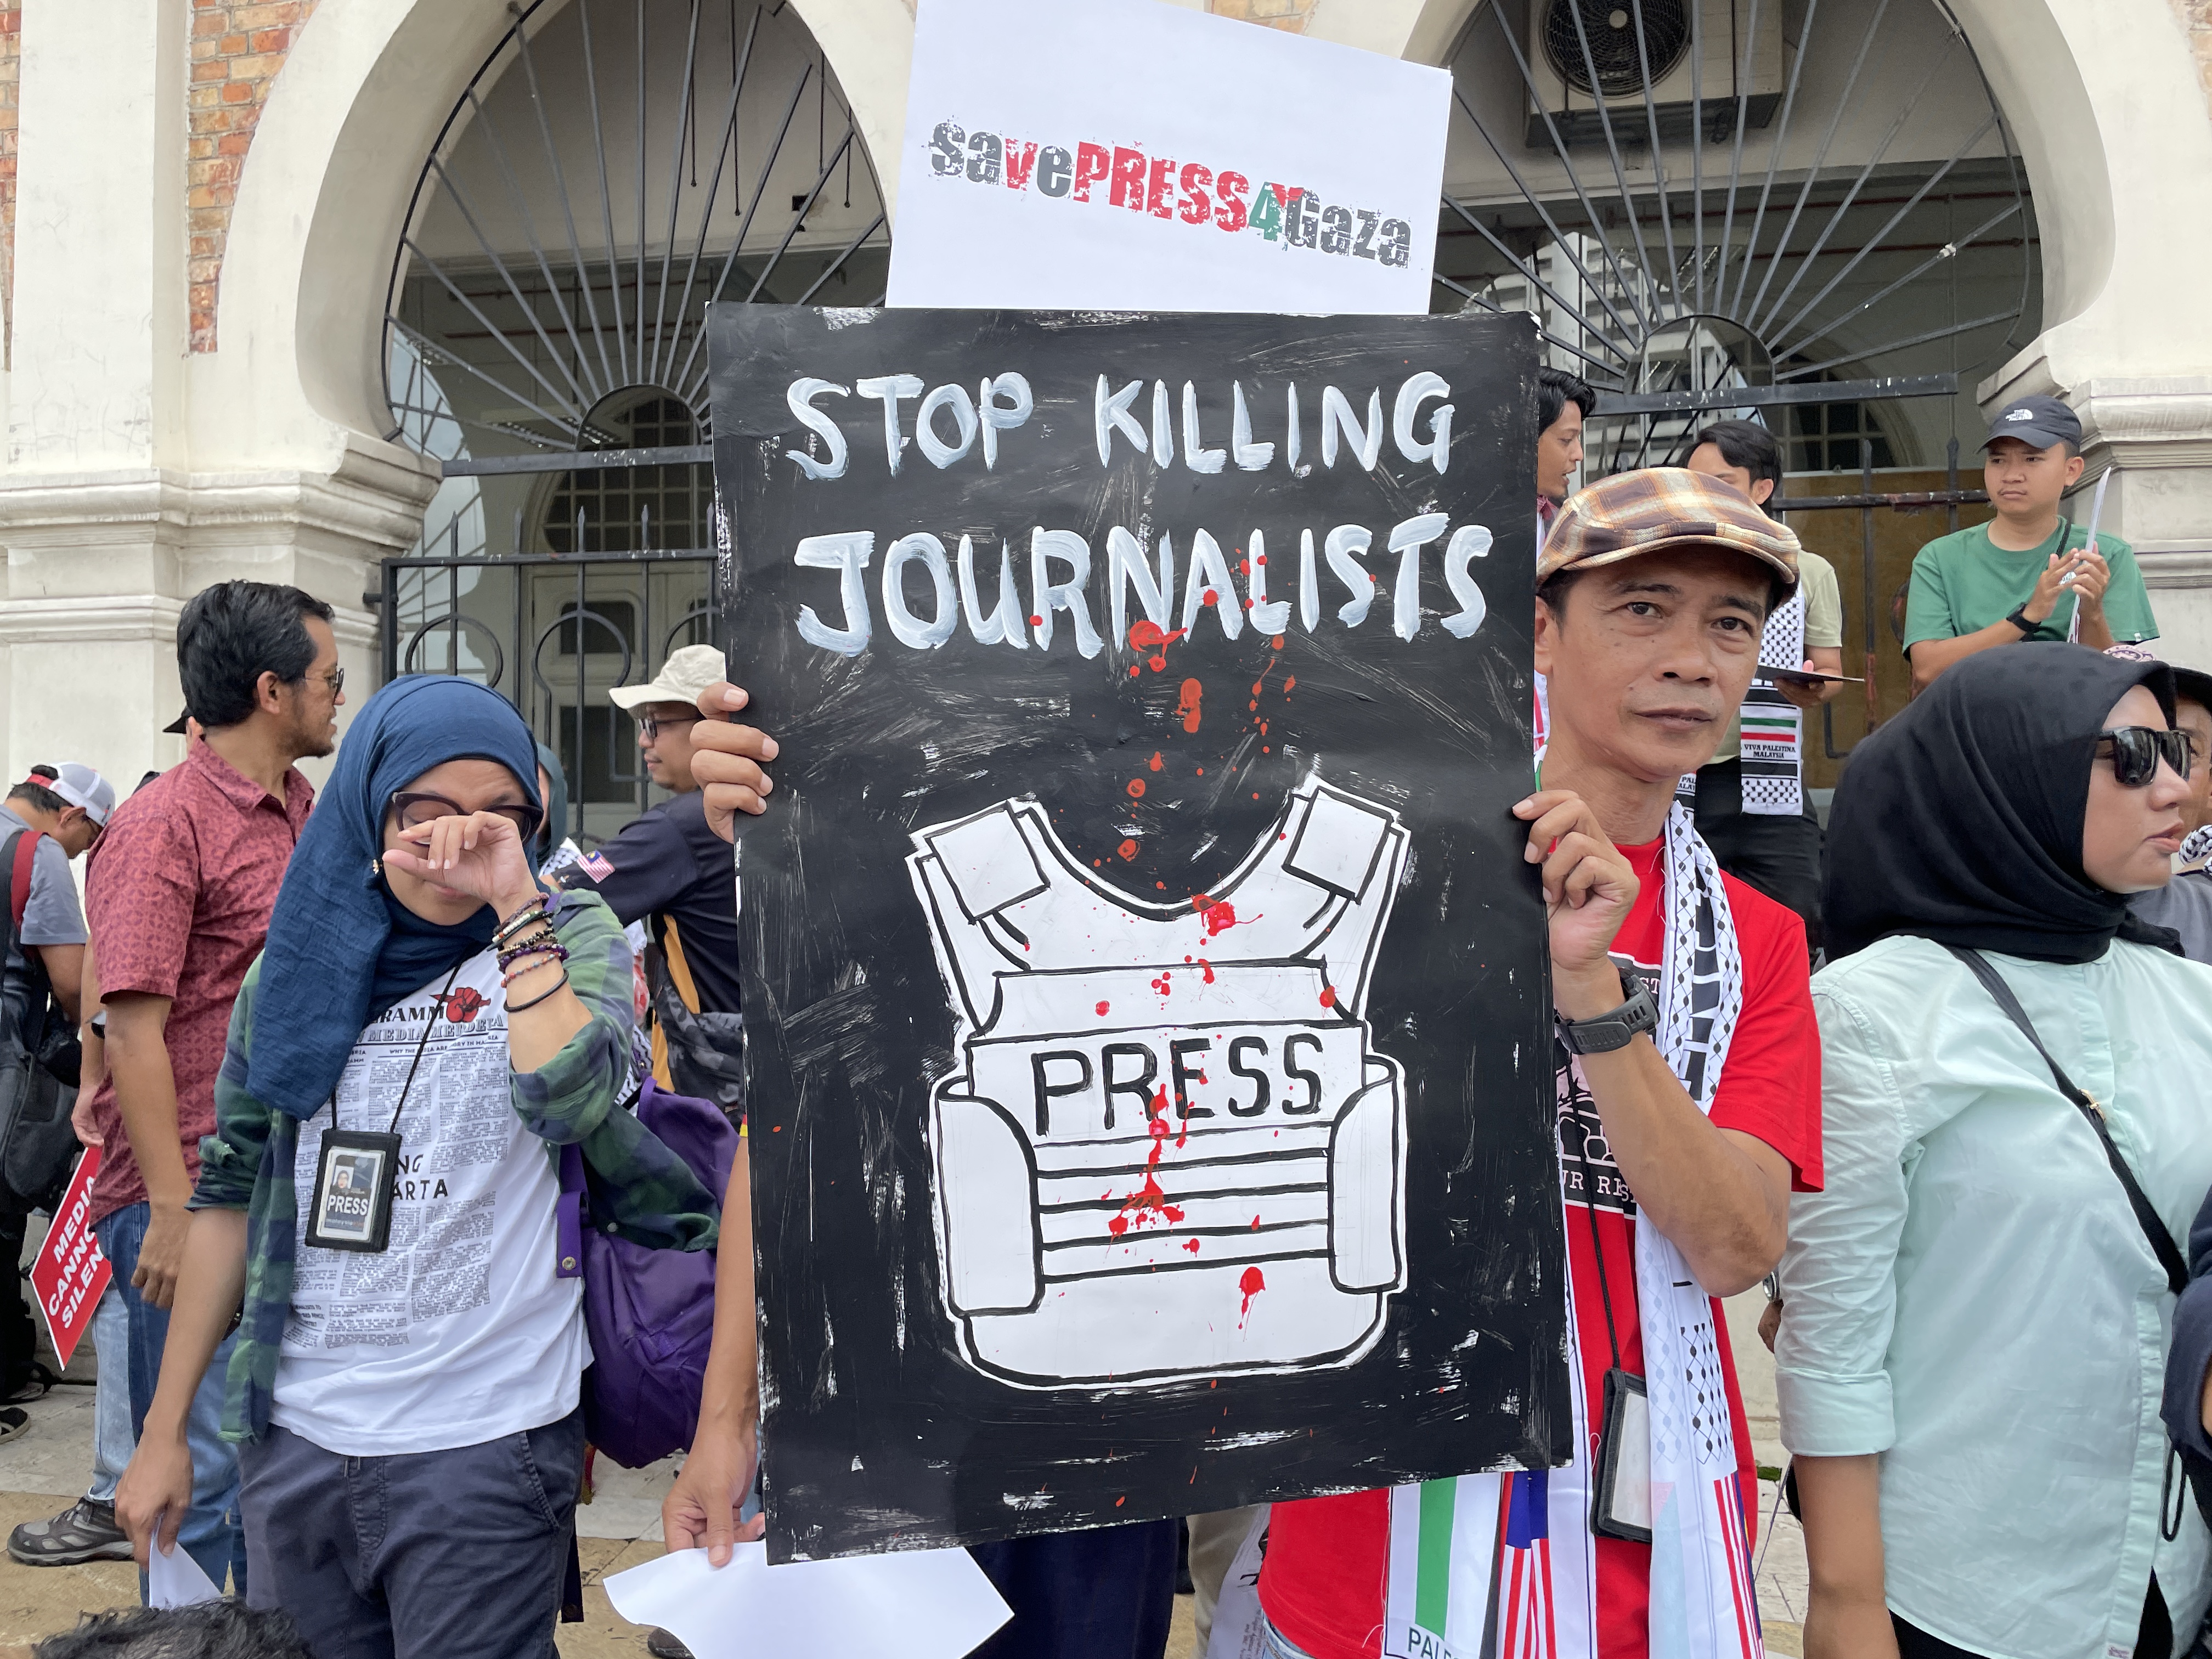 Malaysia's news organizations stage protest urging Gaza journalists protection